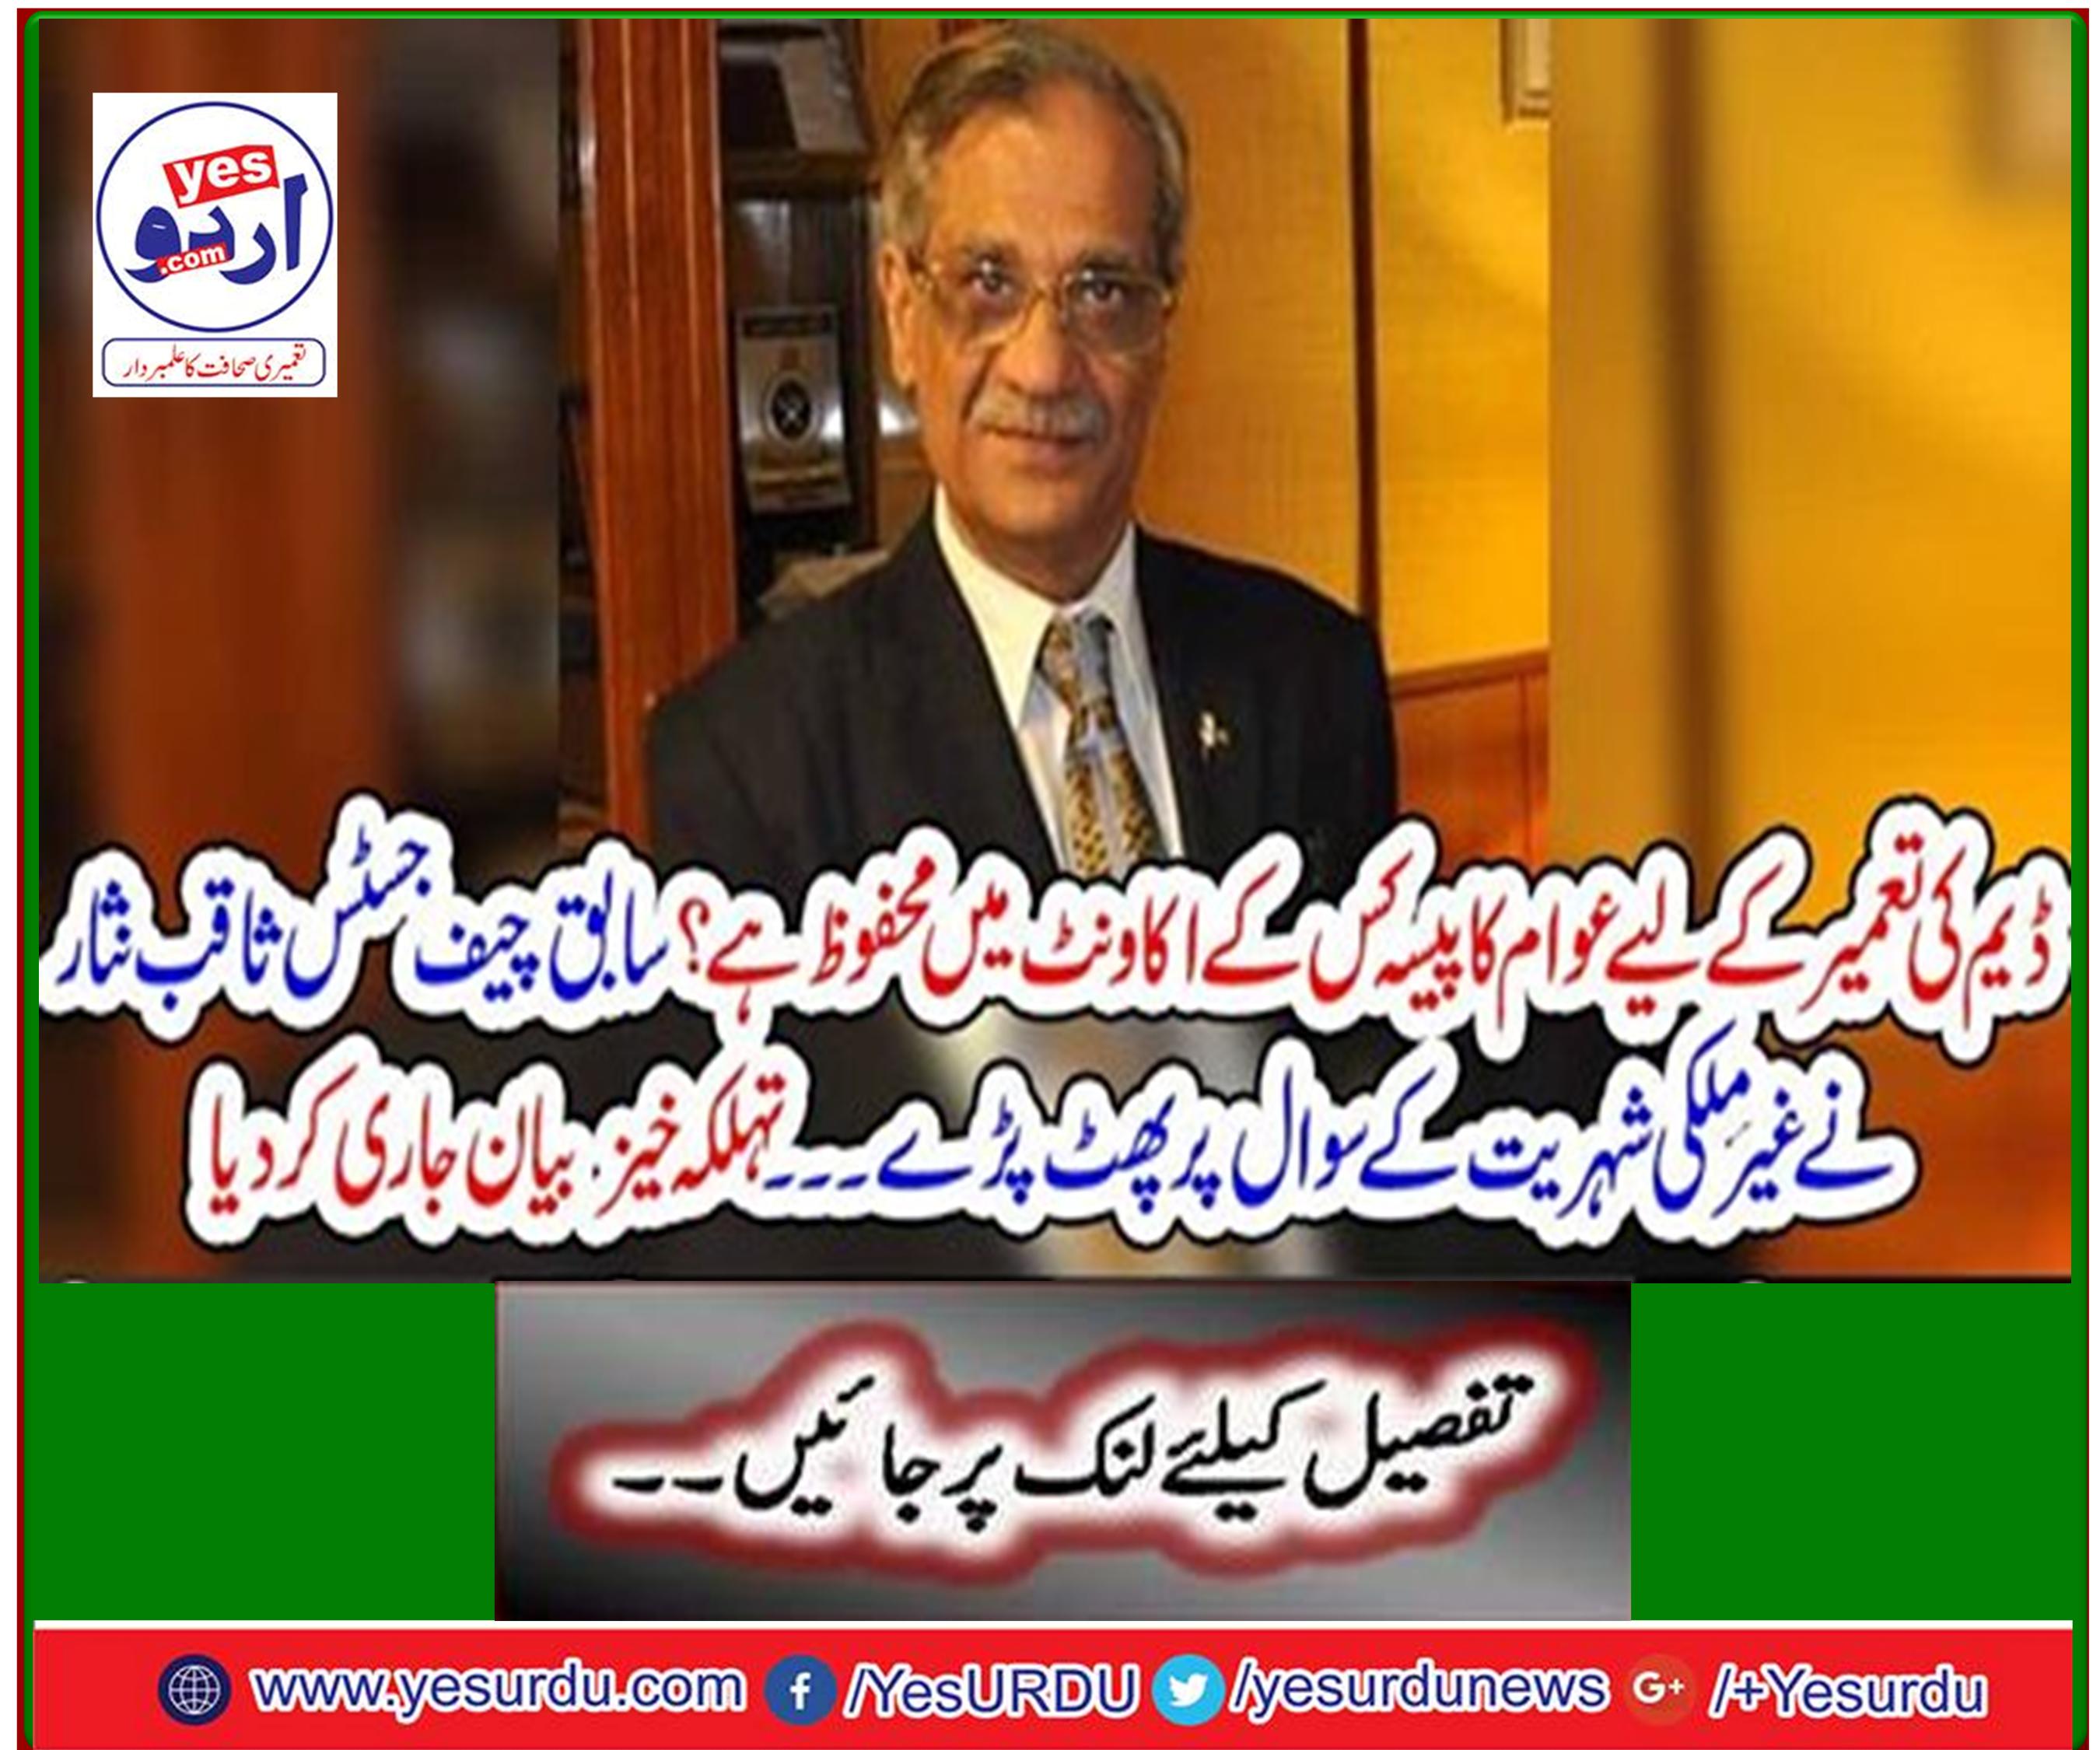 Former Chief Justice Saqib Nisar burst on the question of foreign citizenship Spicy statement released